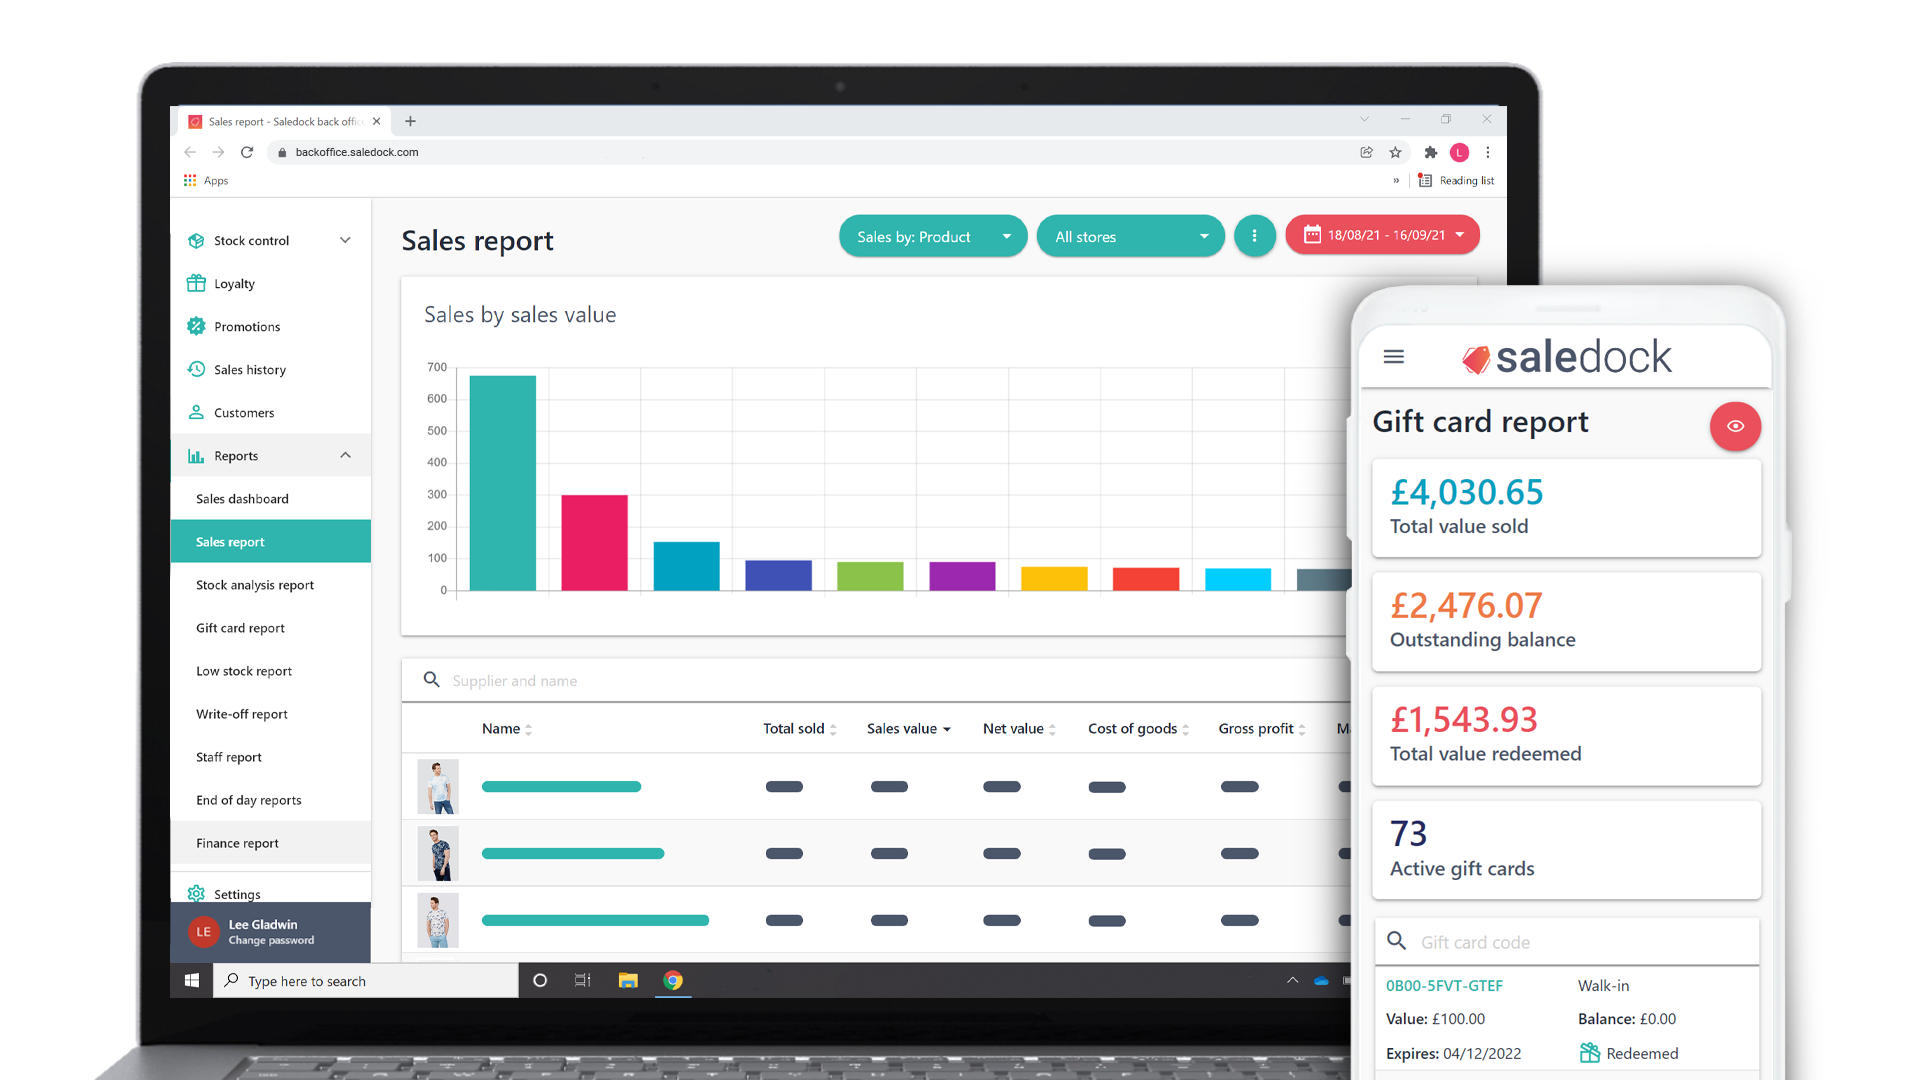 Saledock reports - Understand your business better with real-time analytics. From performance reports and stock analysis reports to gift card reports and end of day reports.